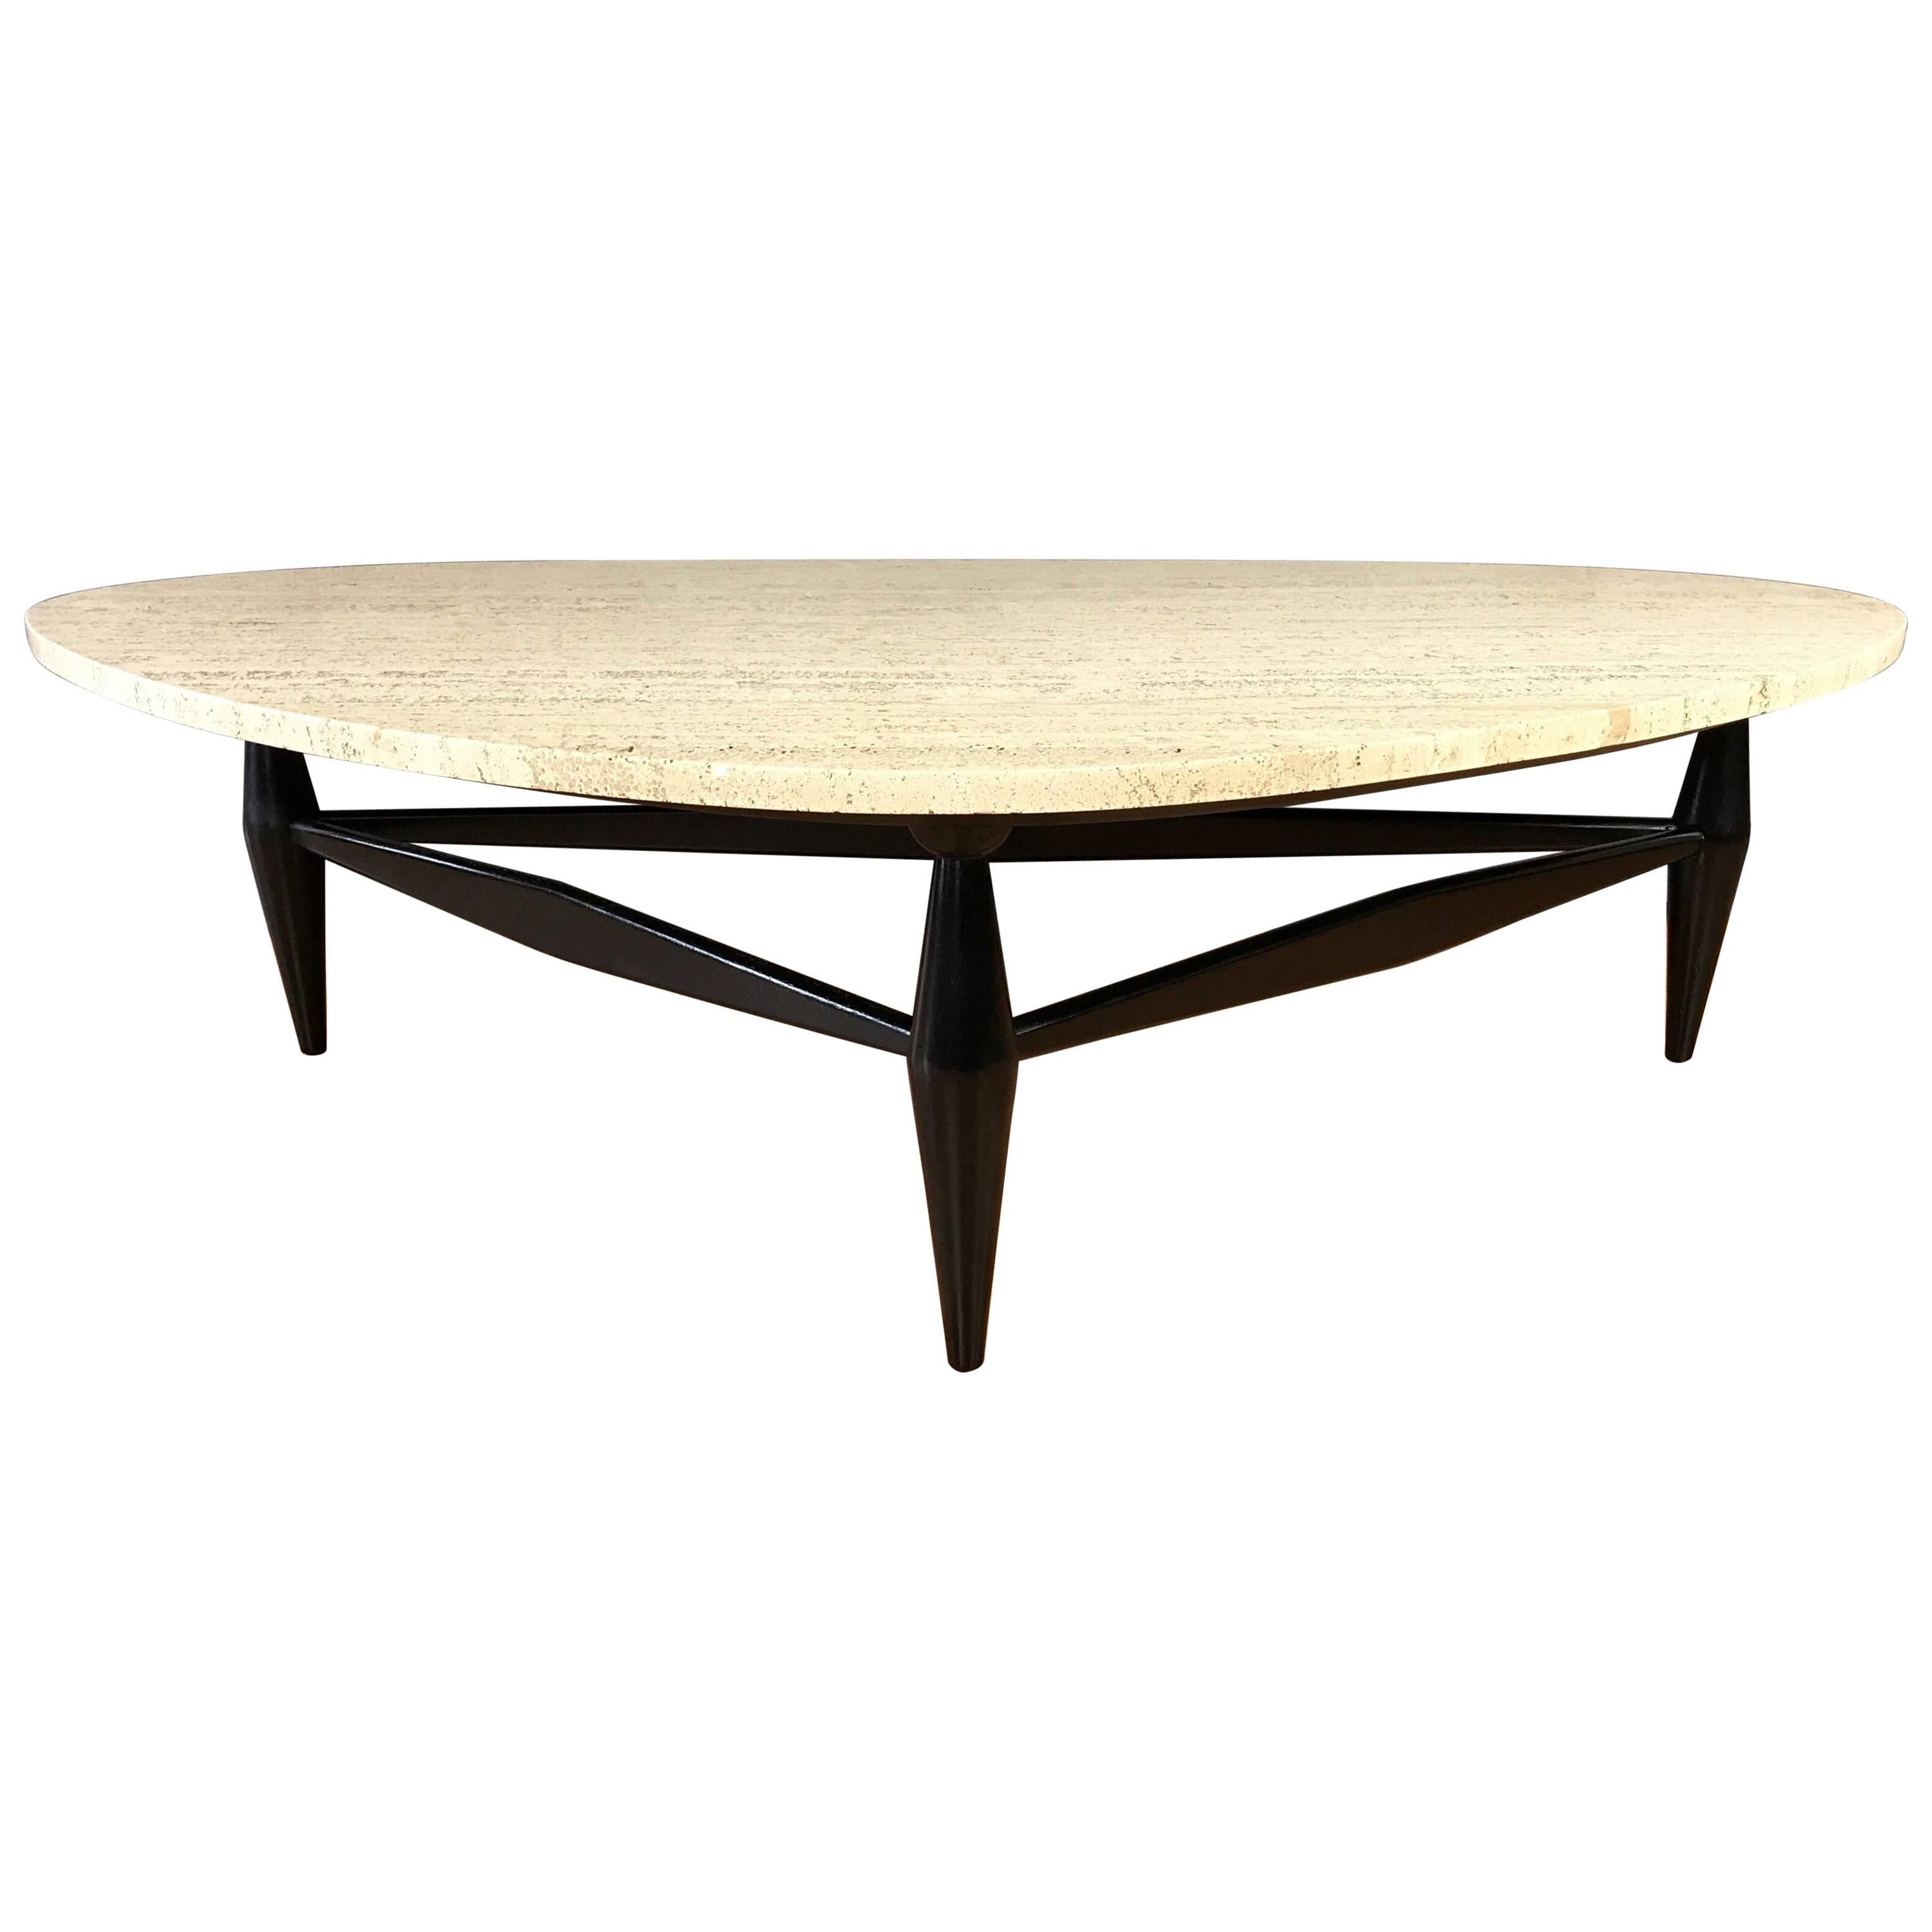 Biomorphic Travertine Coffee Table with Black Lacquered Base